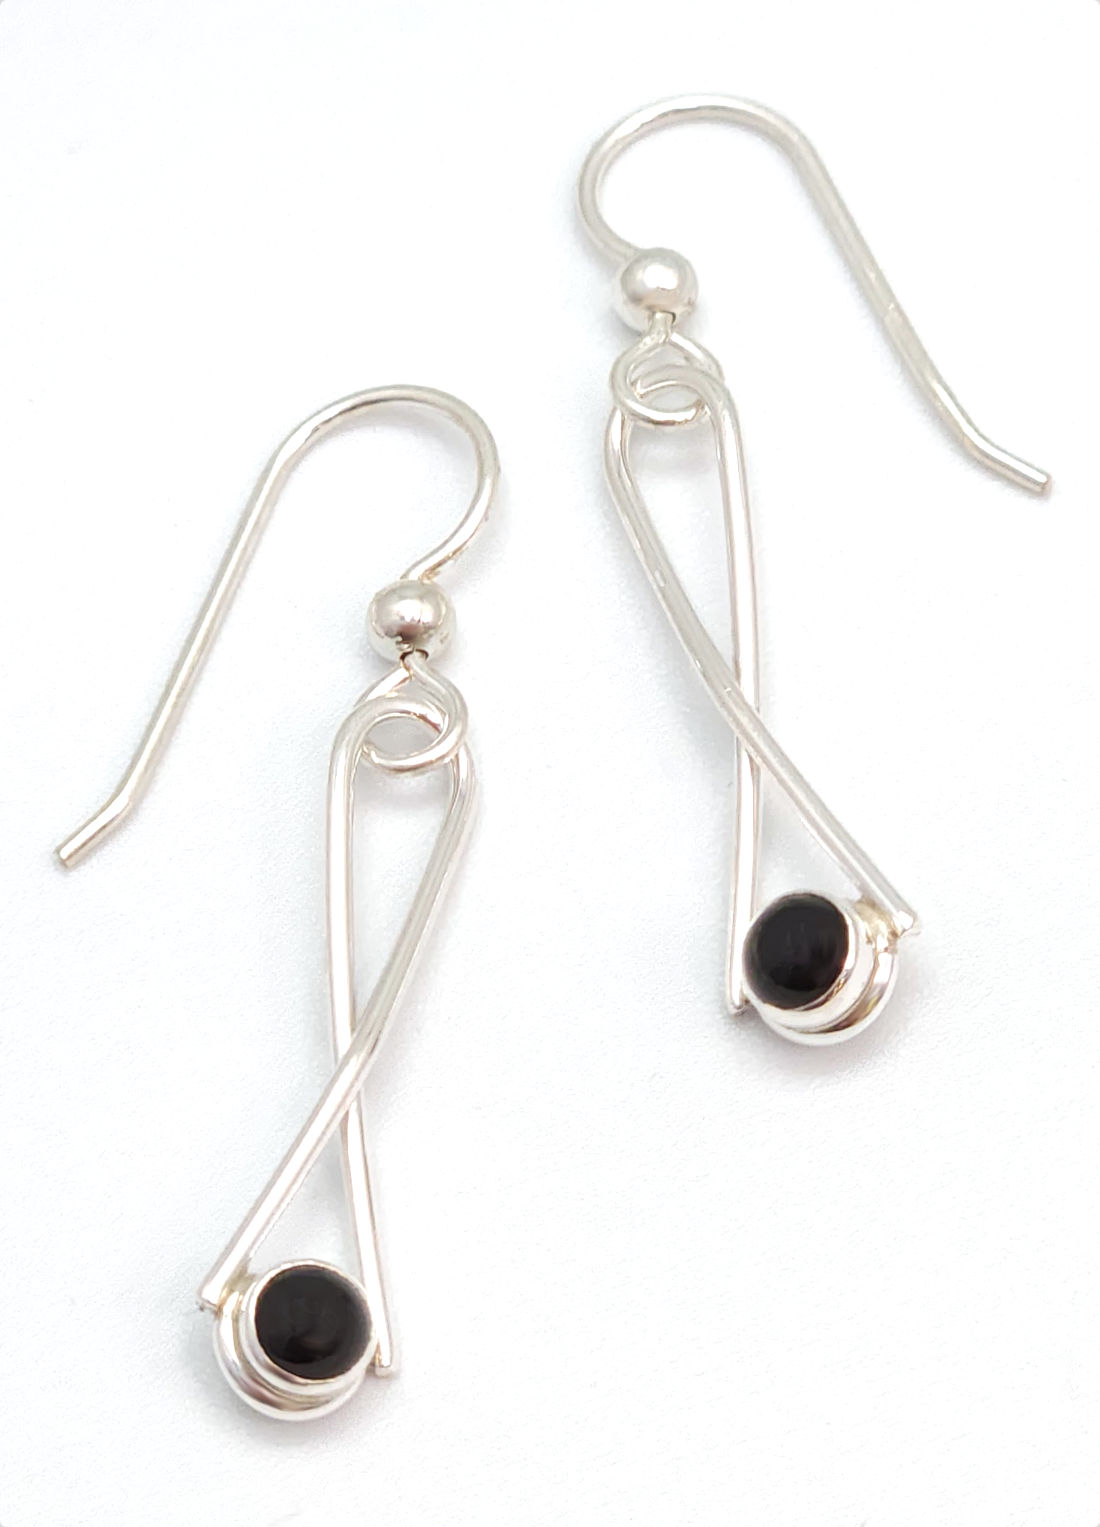 black onyx and sterling silver earrings by Ted Walker